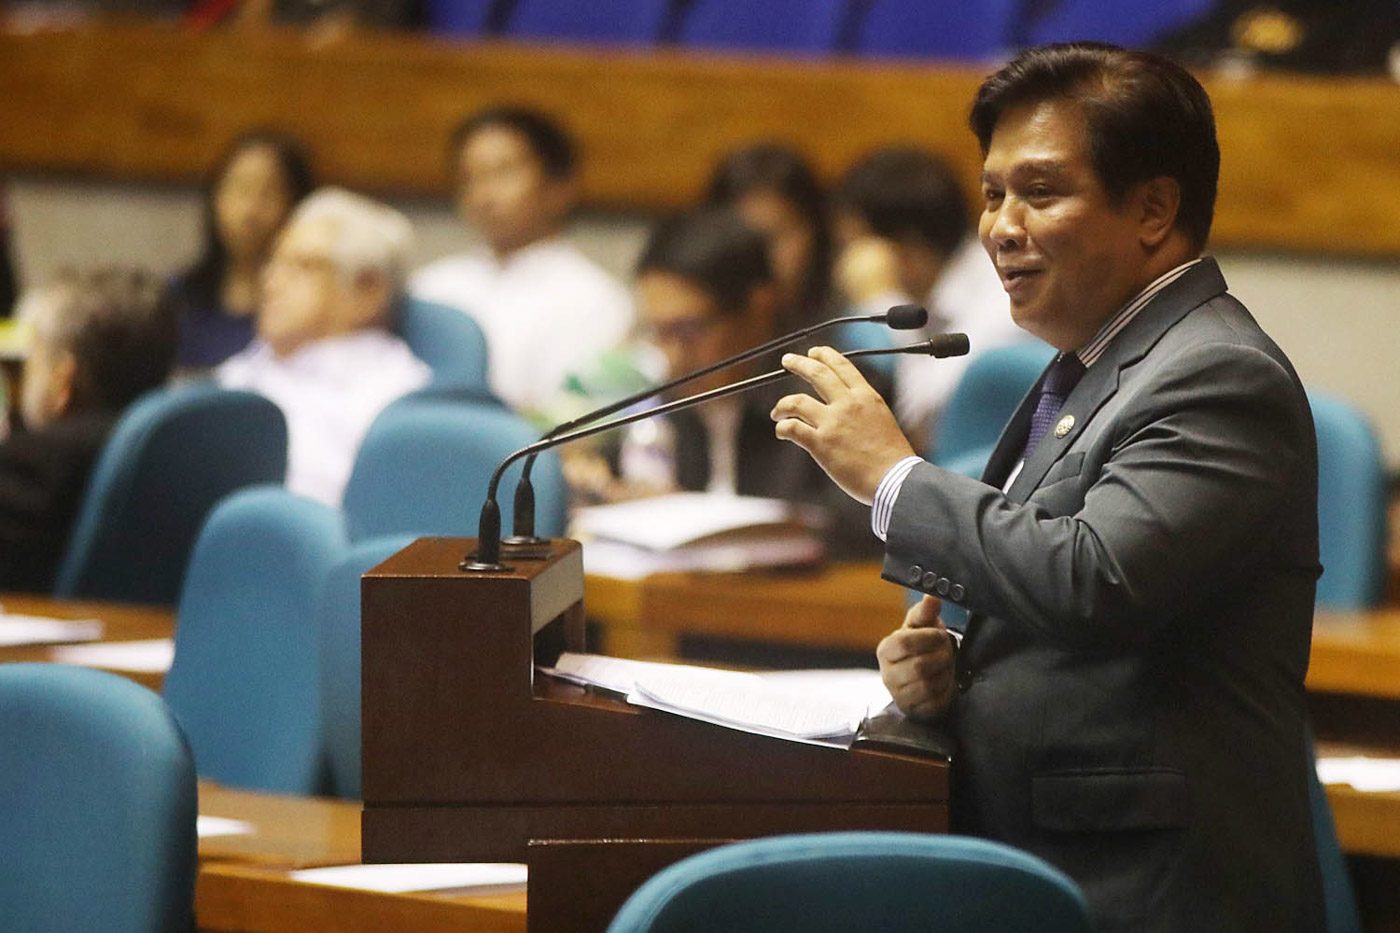 What made the House deliver its promised P13-M bounty for Batocabe’s killers?